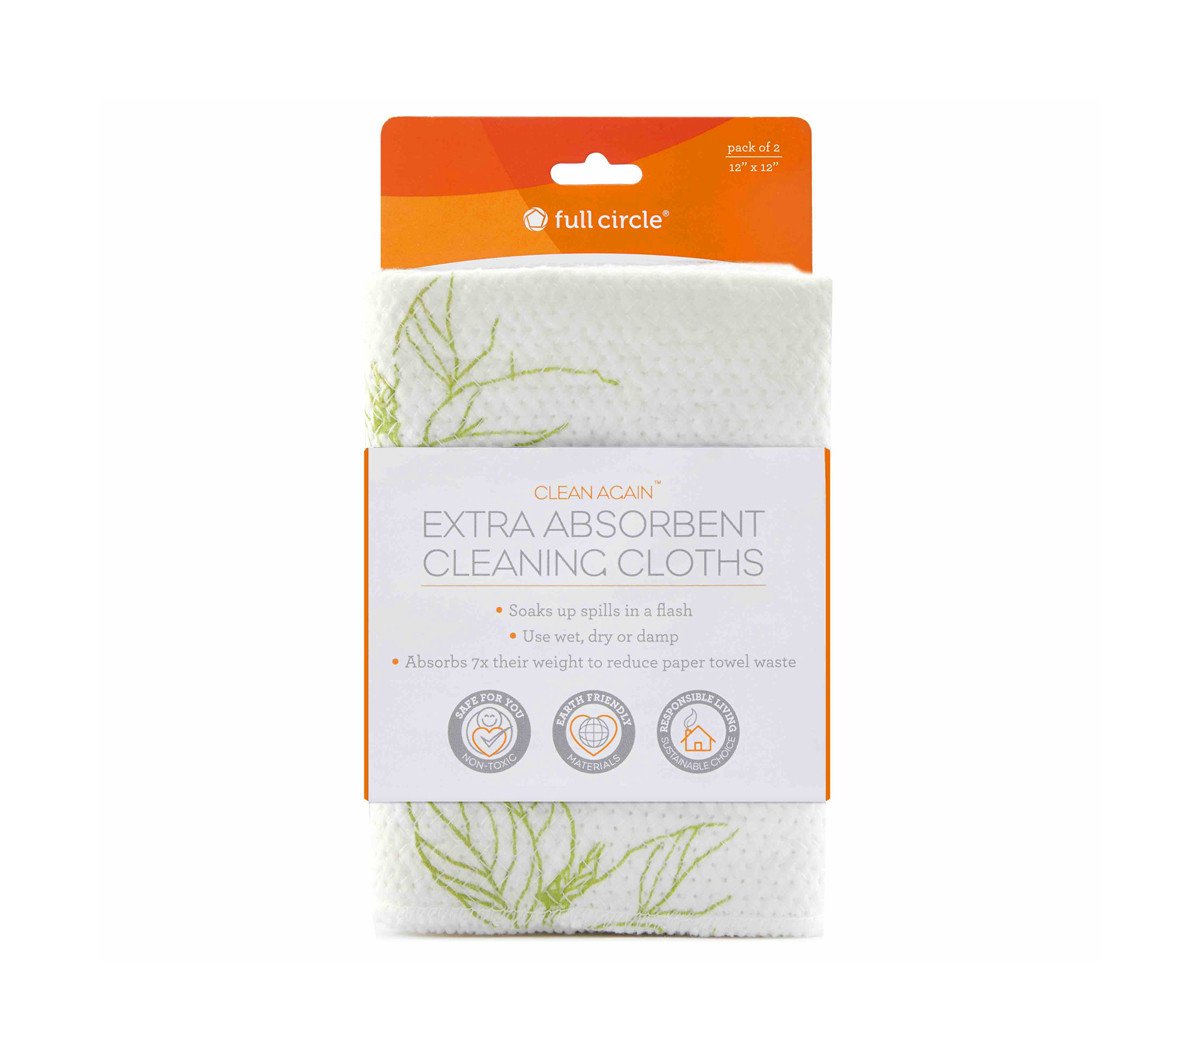 Full Circle Extra Absorbent Cleaning Cloths 2 Packs of 2 12x12" Cloths 4 Cloths 